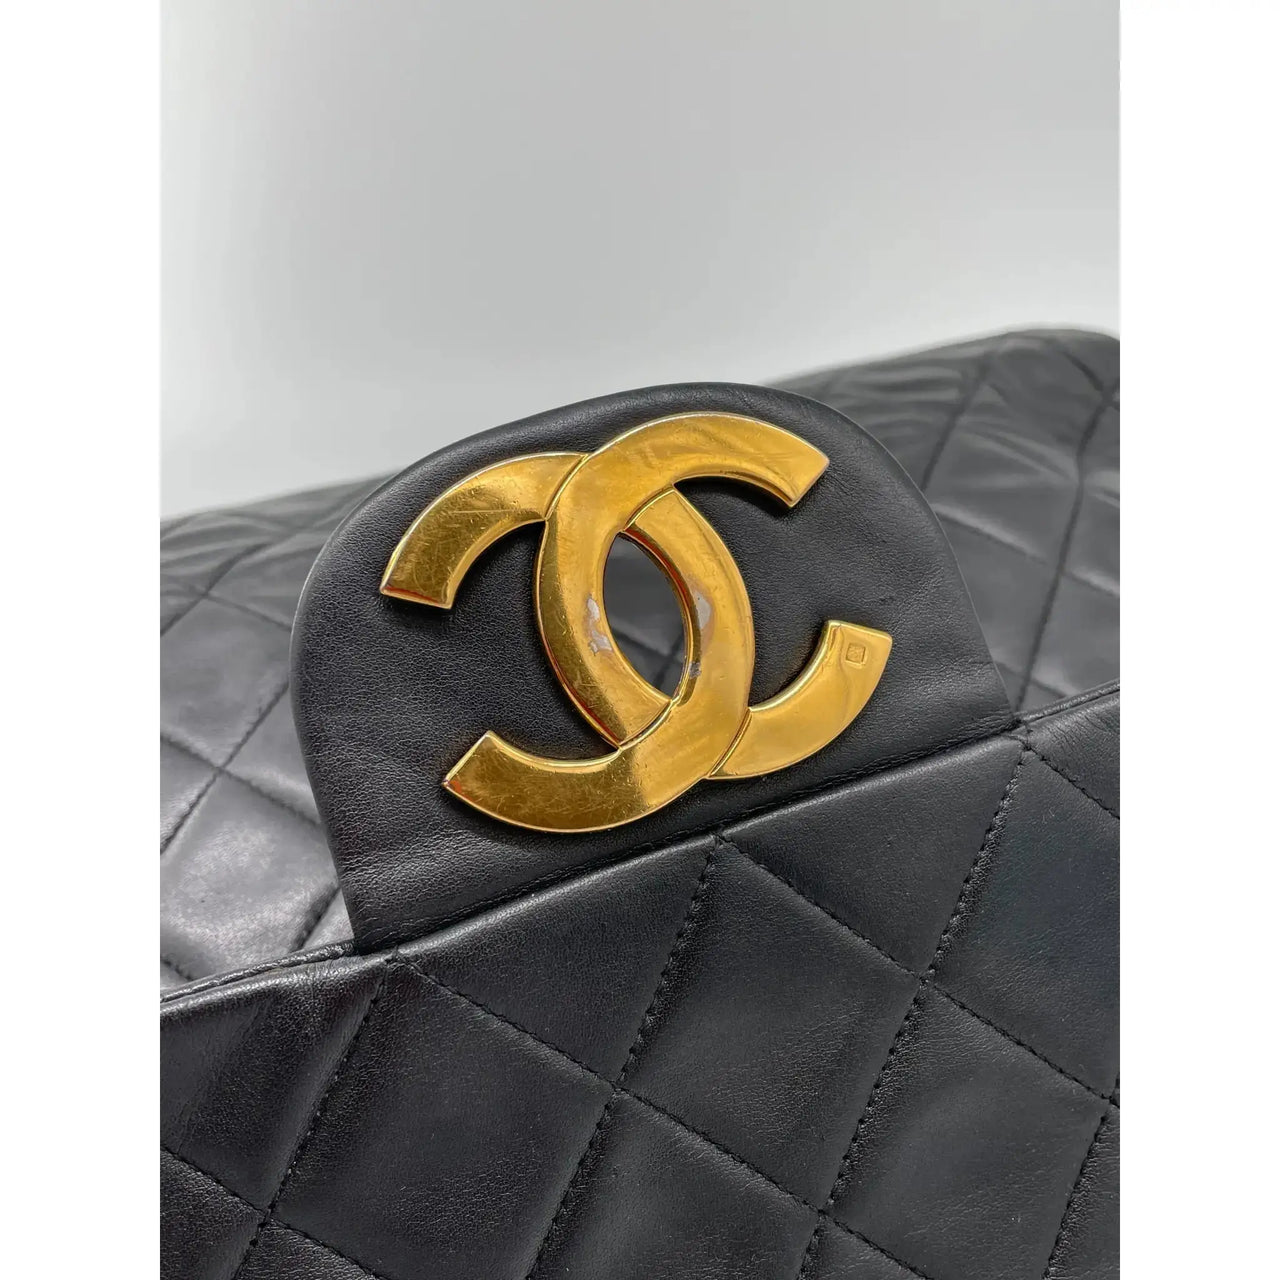 gold plated chanel bag